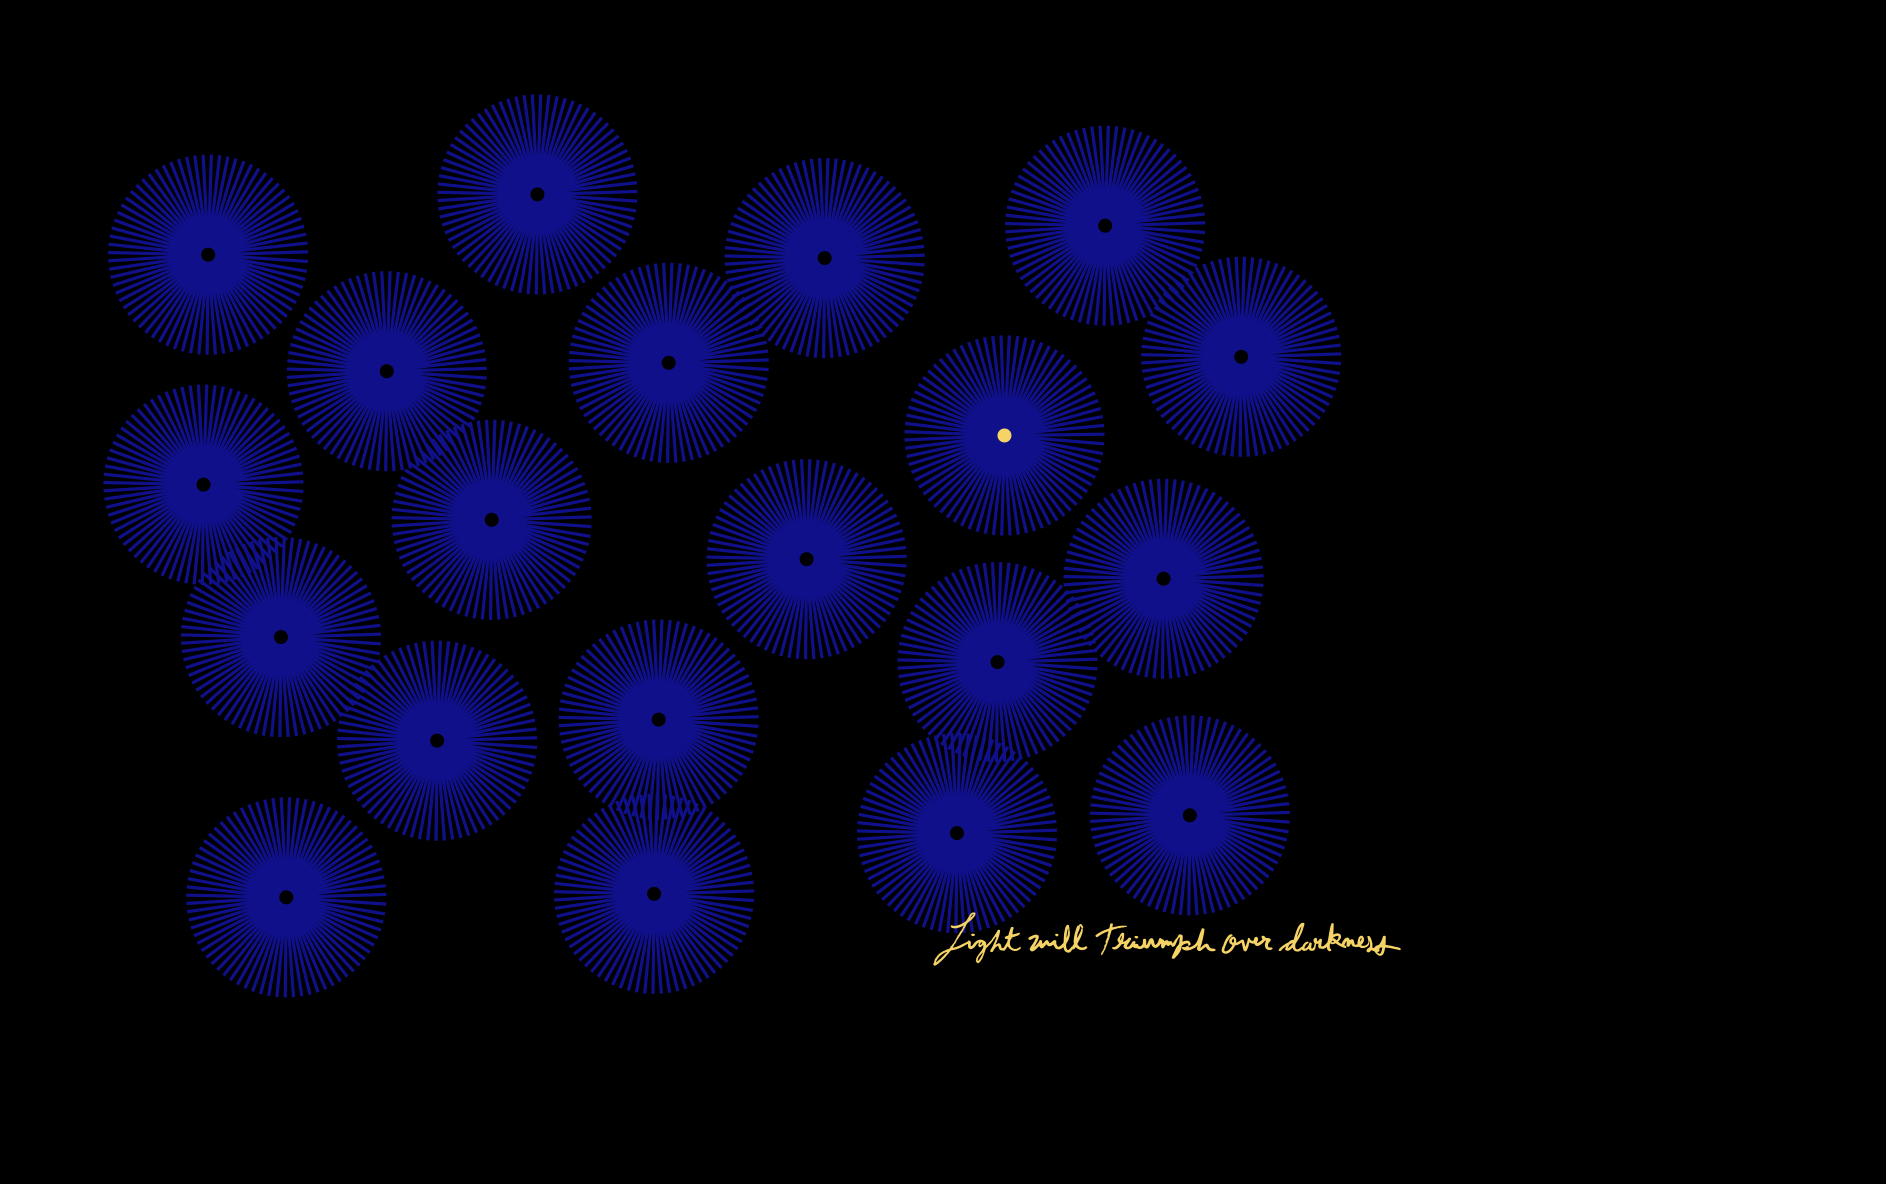 Graphic of blue circles over black background with "light will triumph over darkness"